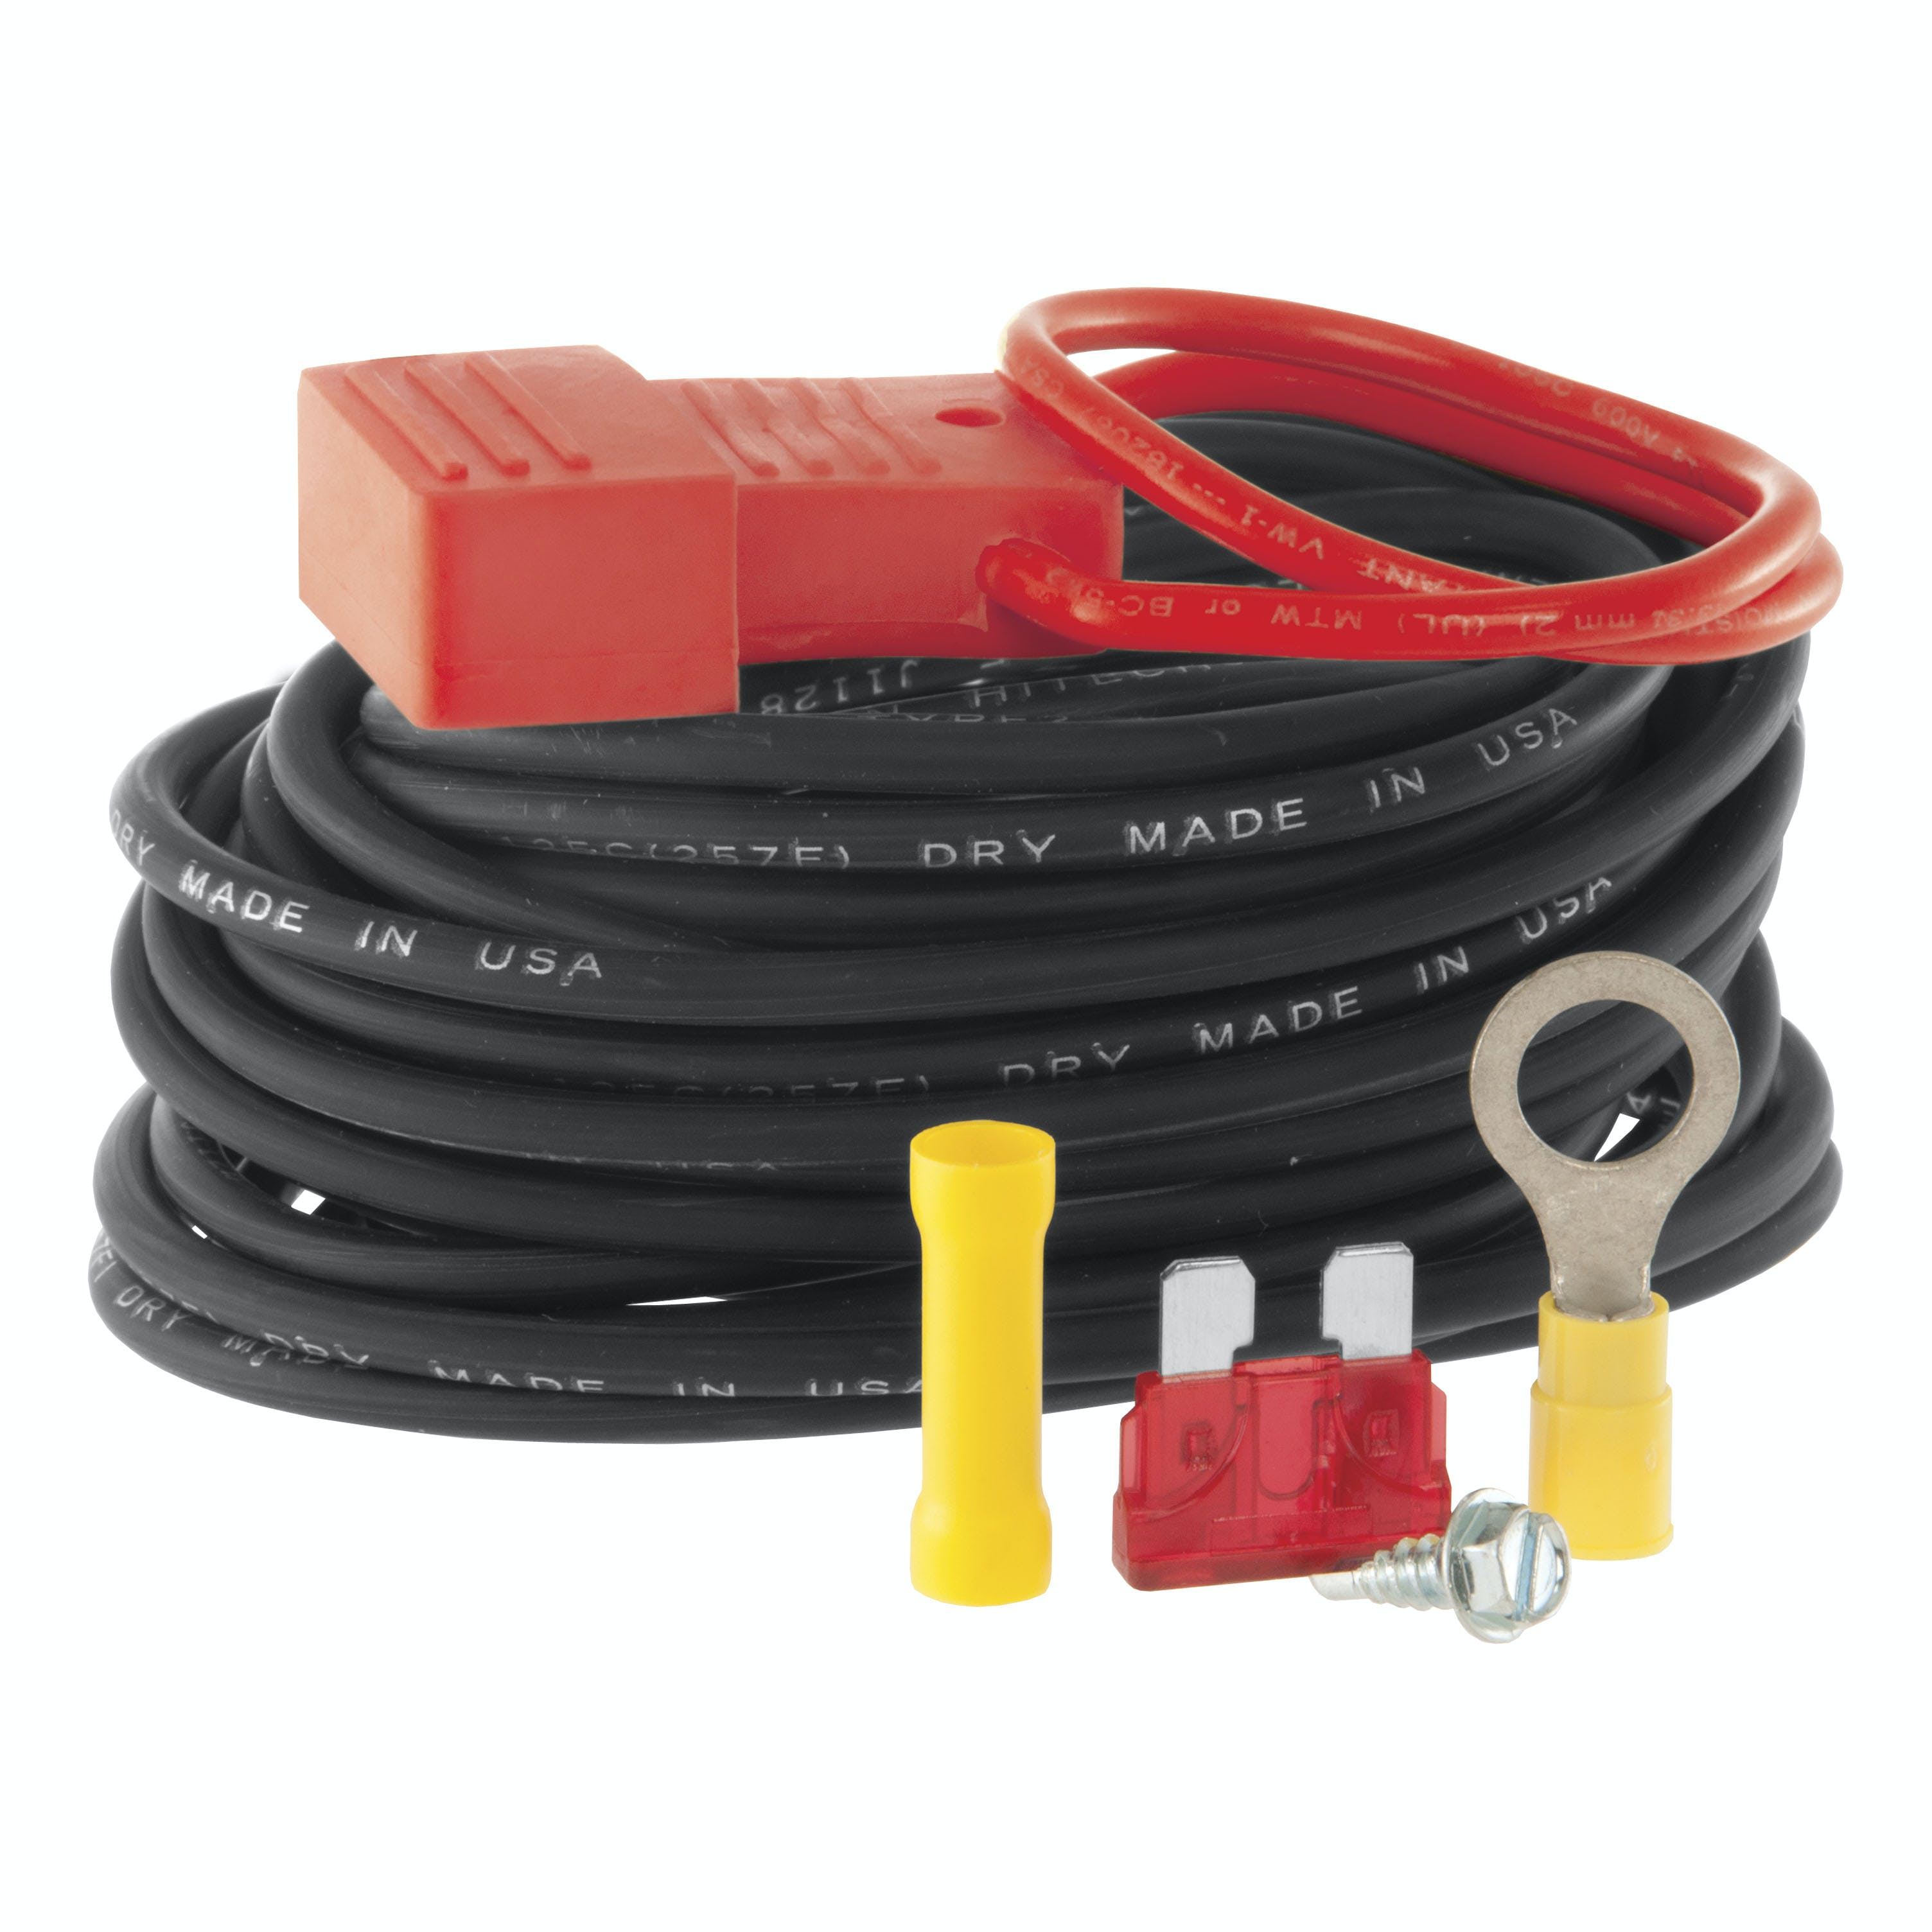 CURT 55151 Powered Converter Wiring Kit (10 Amps)